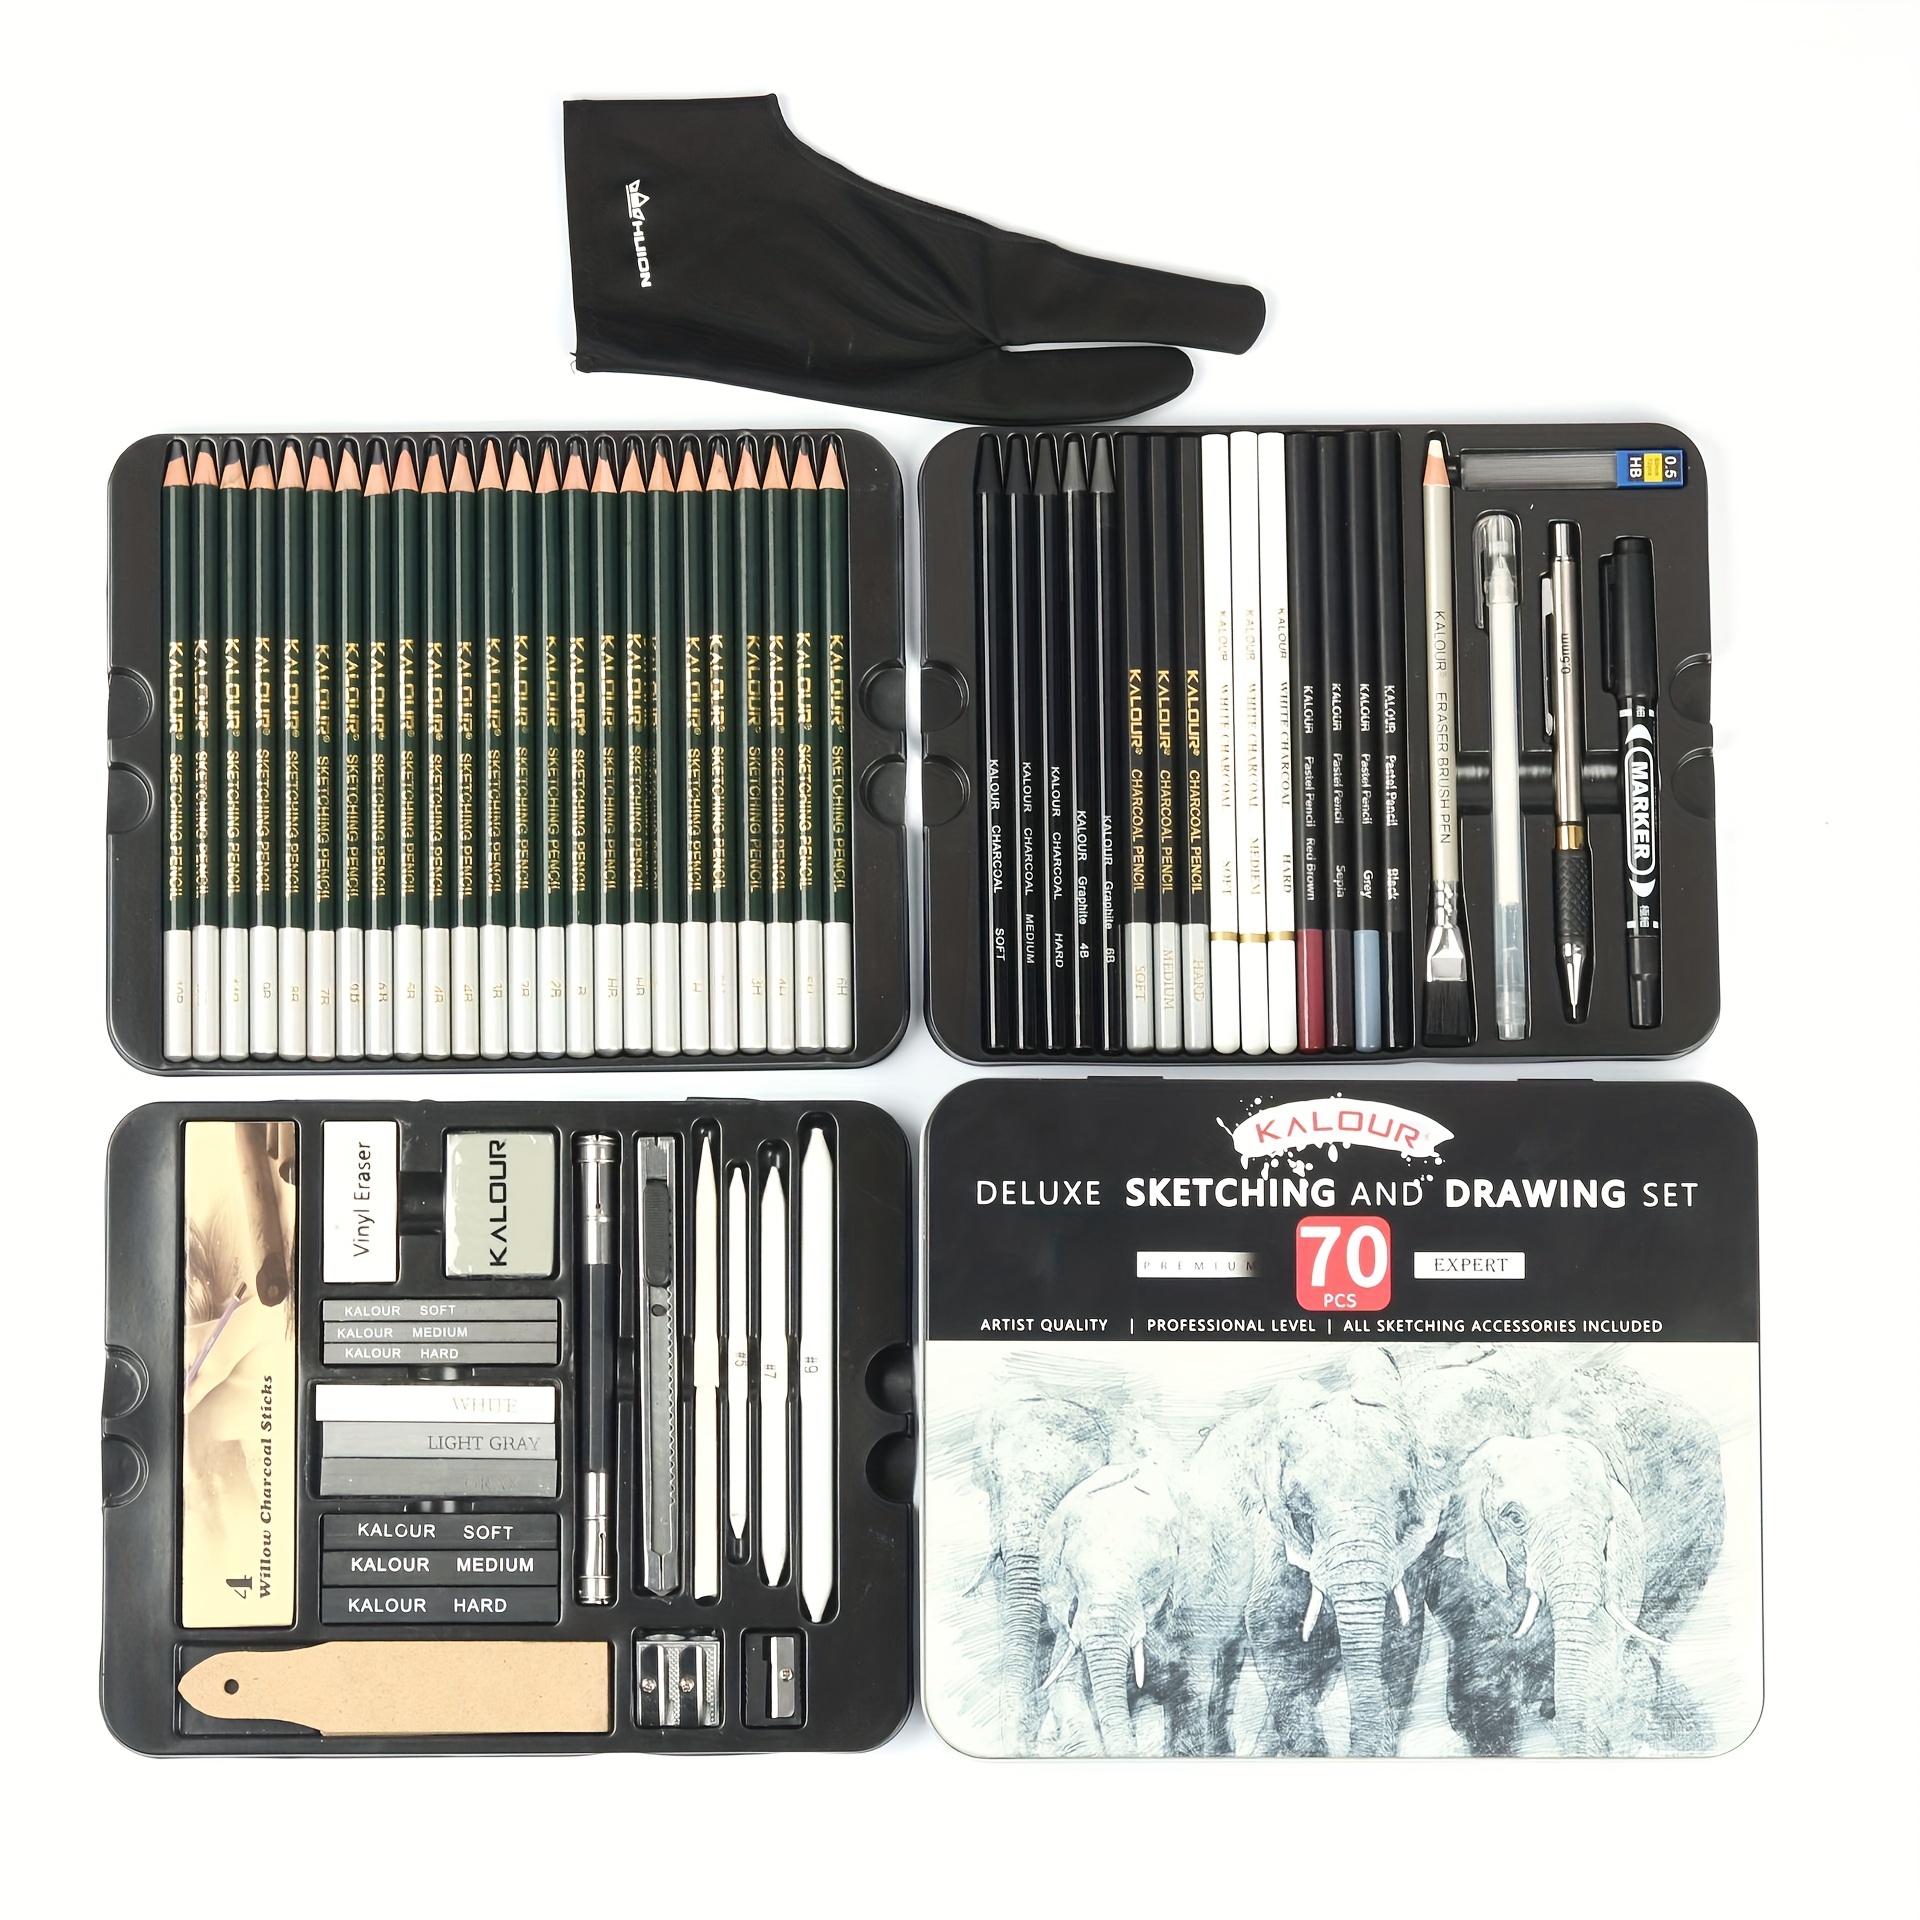 KALOUR 54-Pack Sketch Drawing Pencils Kit with Sketchbook,Include